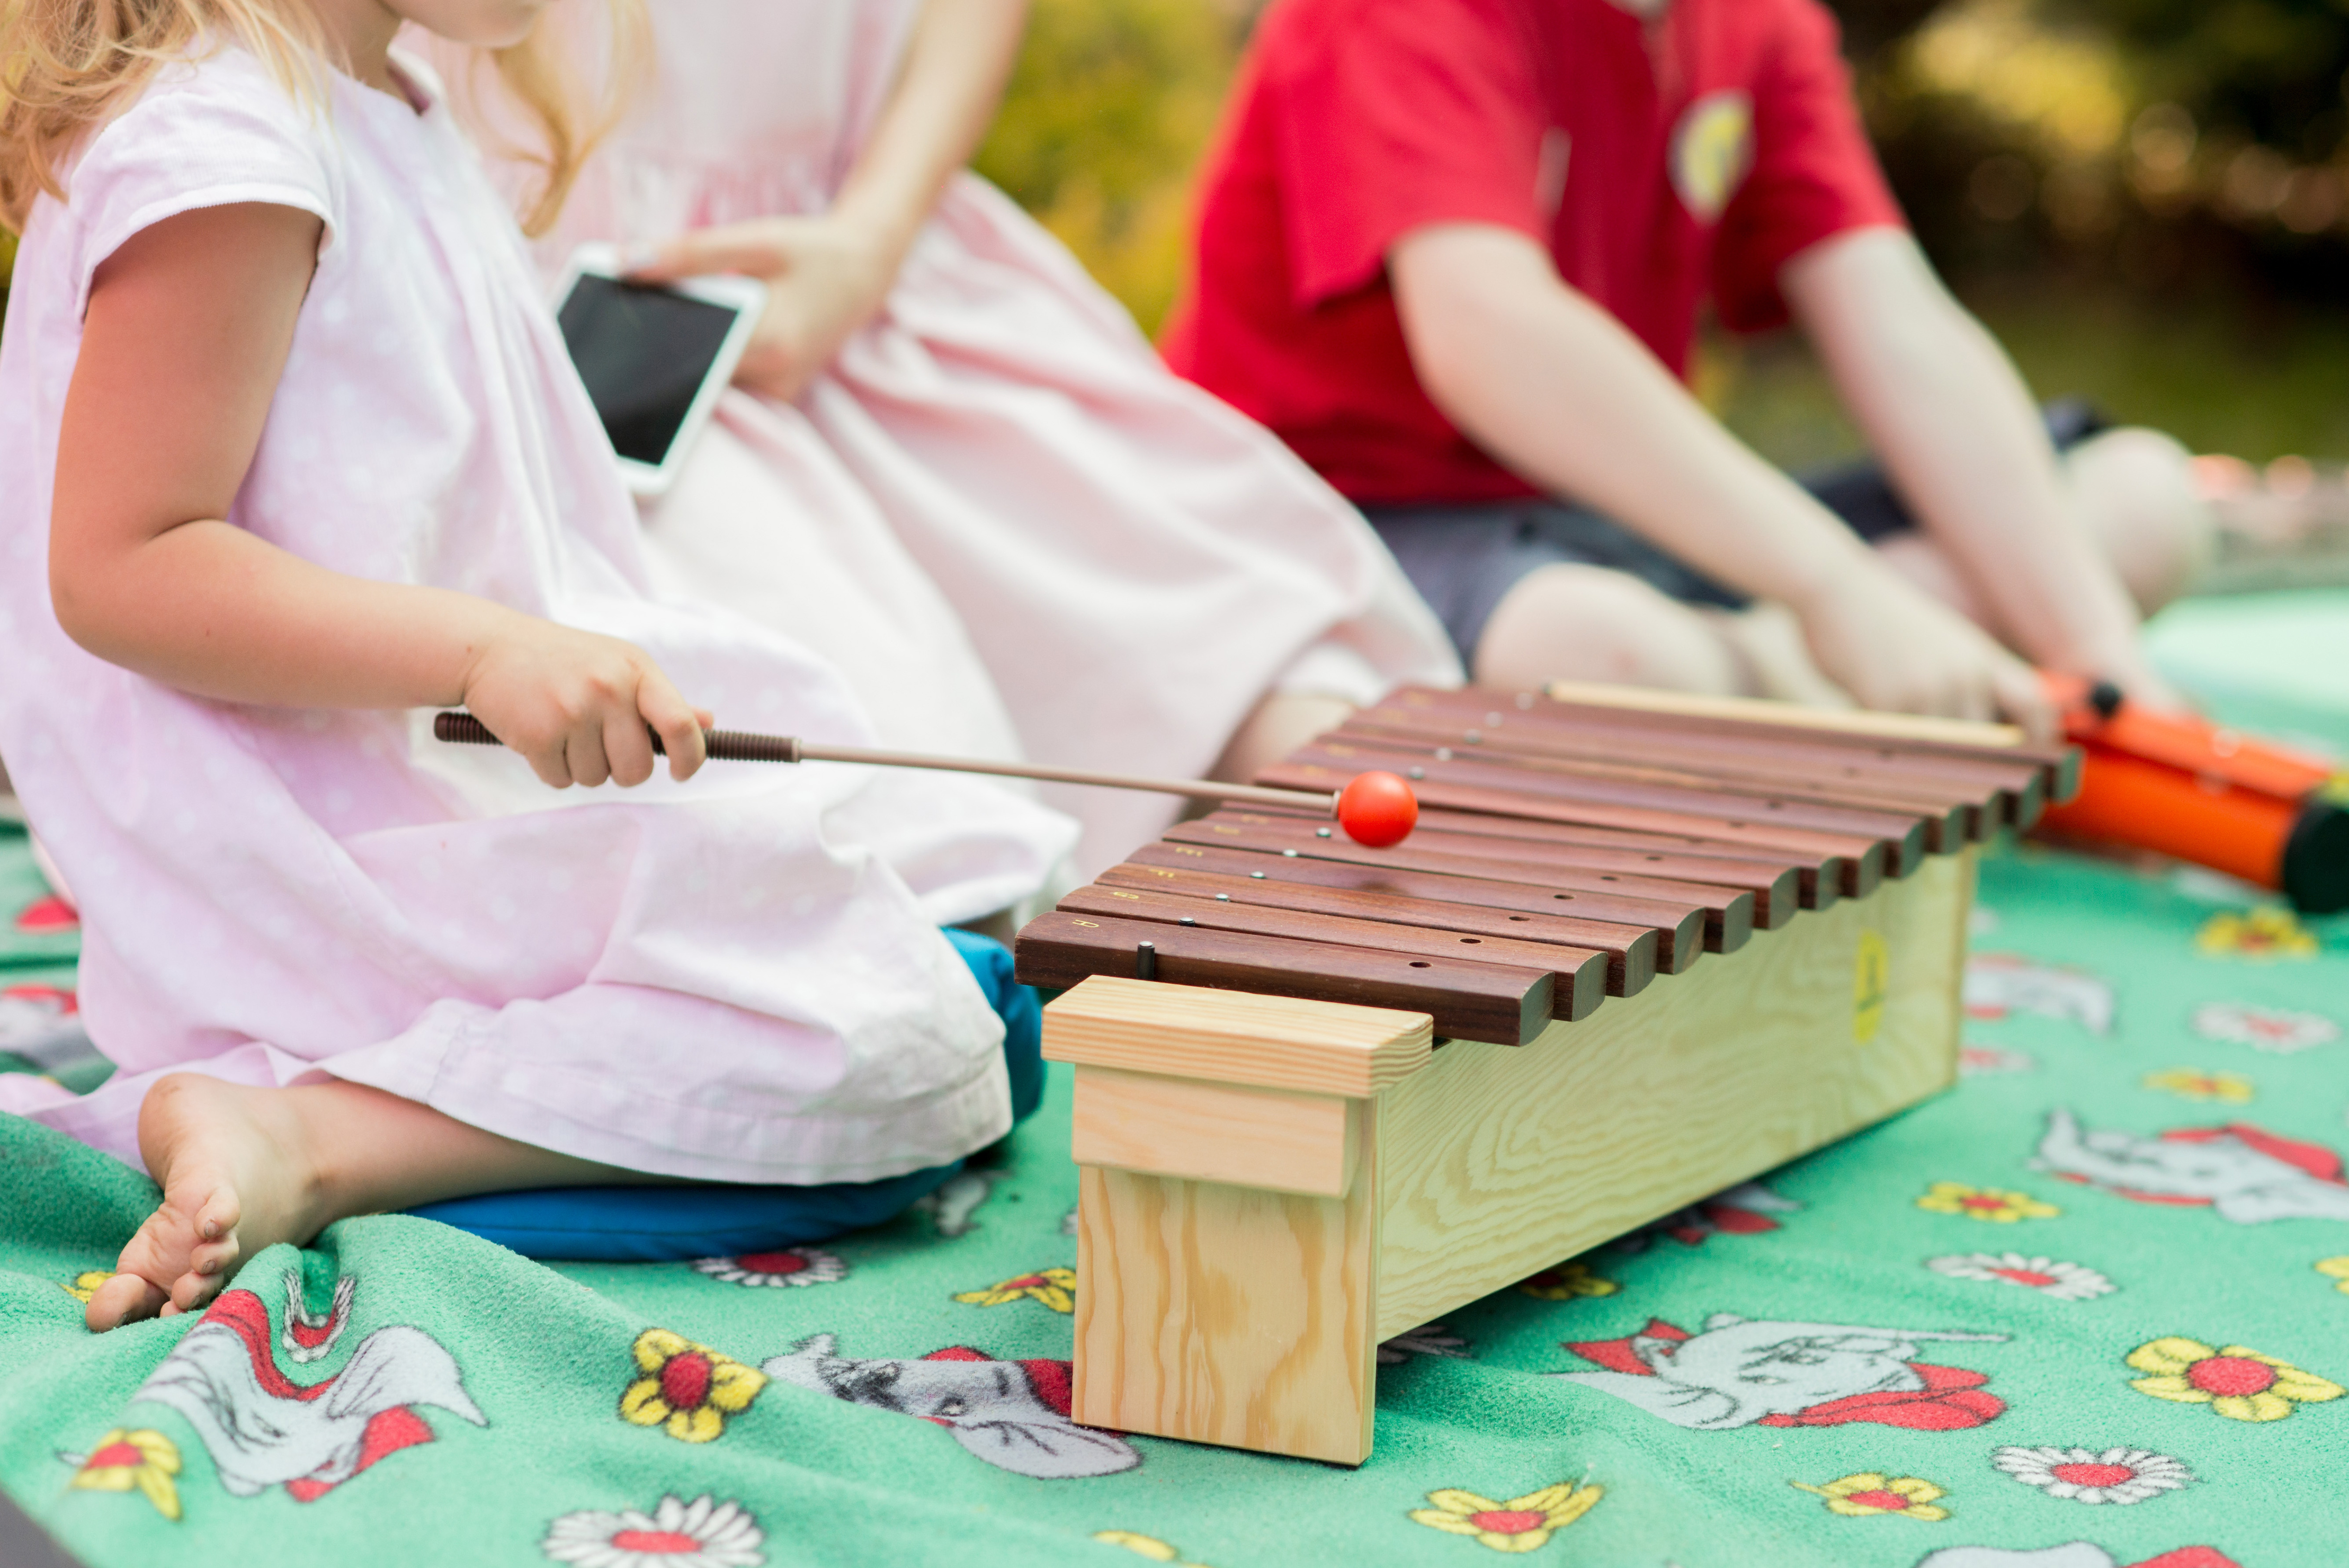 Baby girl playing a musical instrument xylophone